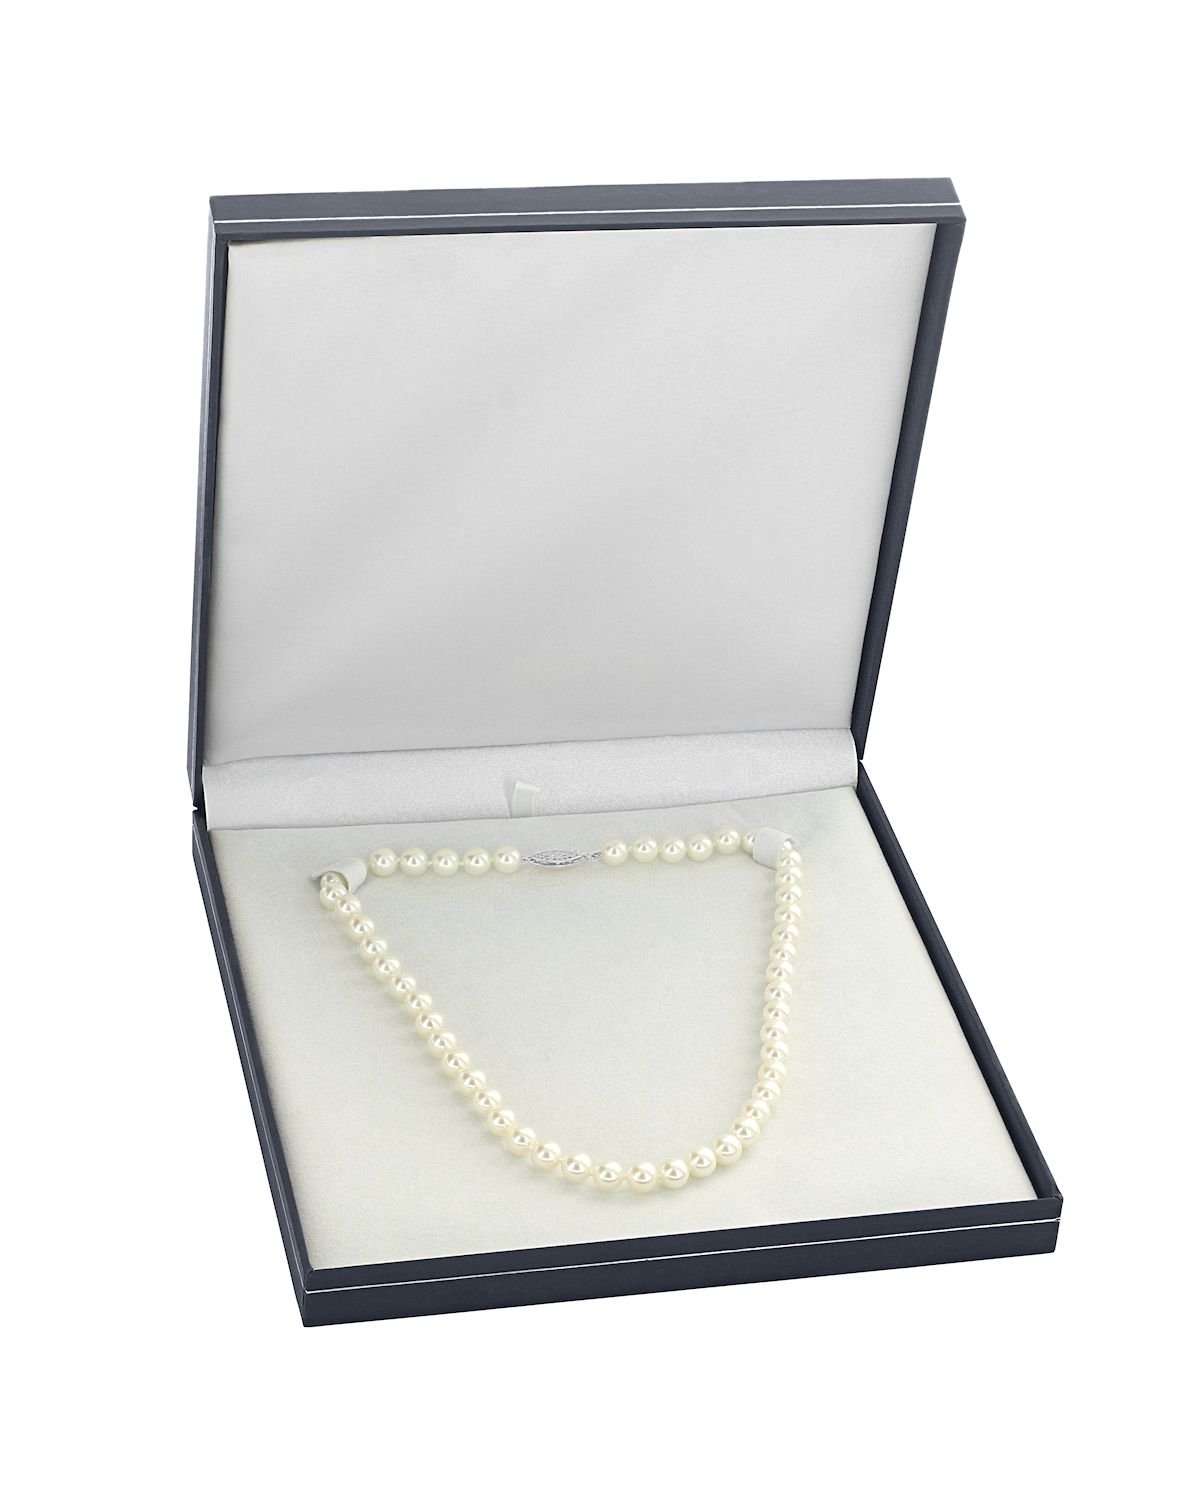 White Japanese Akoya Pearl Necklace, 8.5-9.0mm - AAA Quality